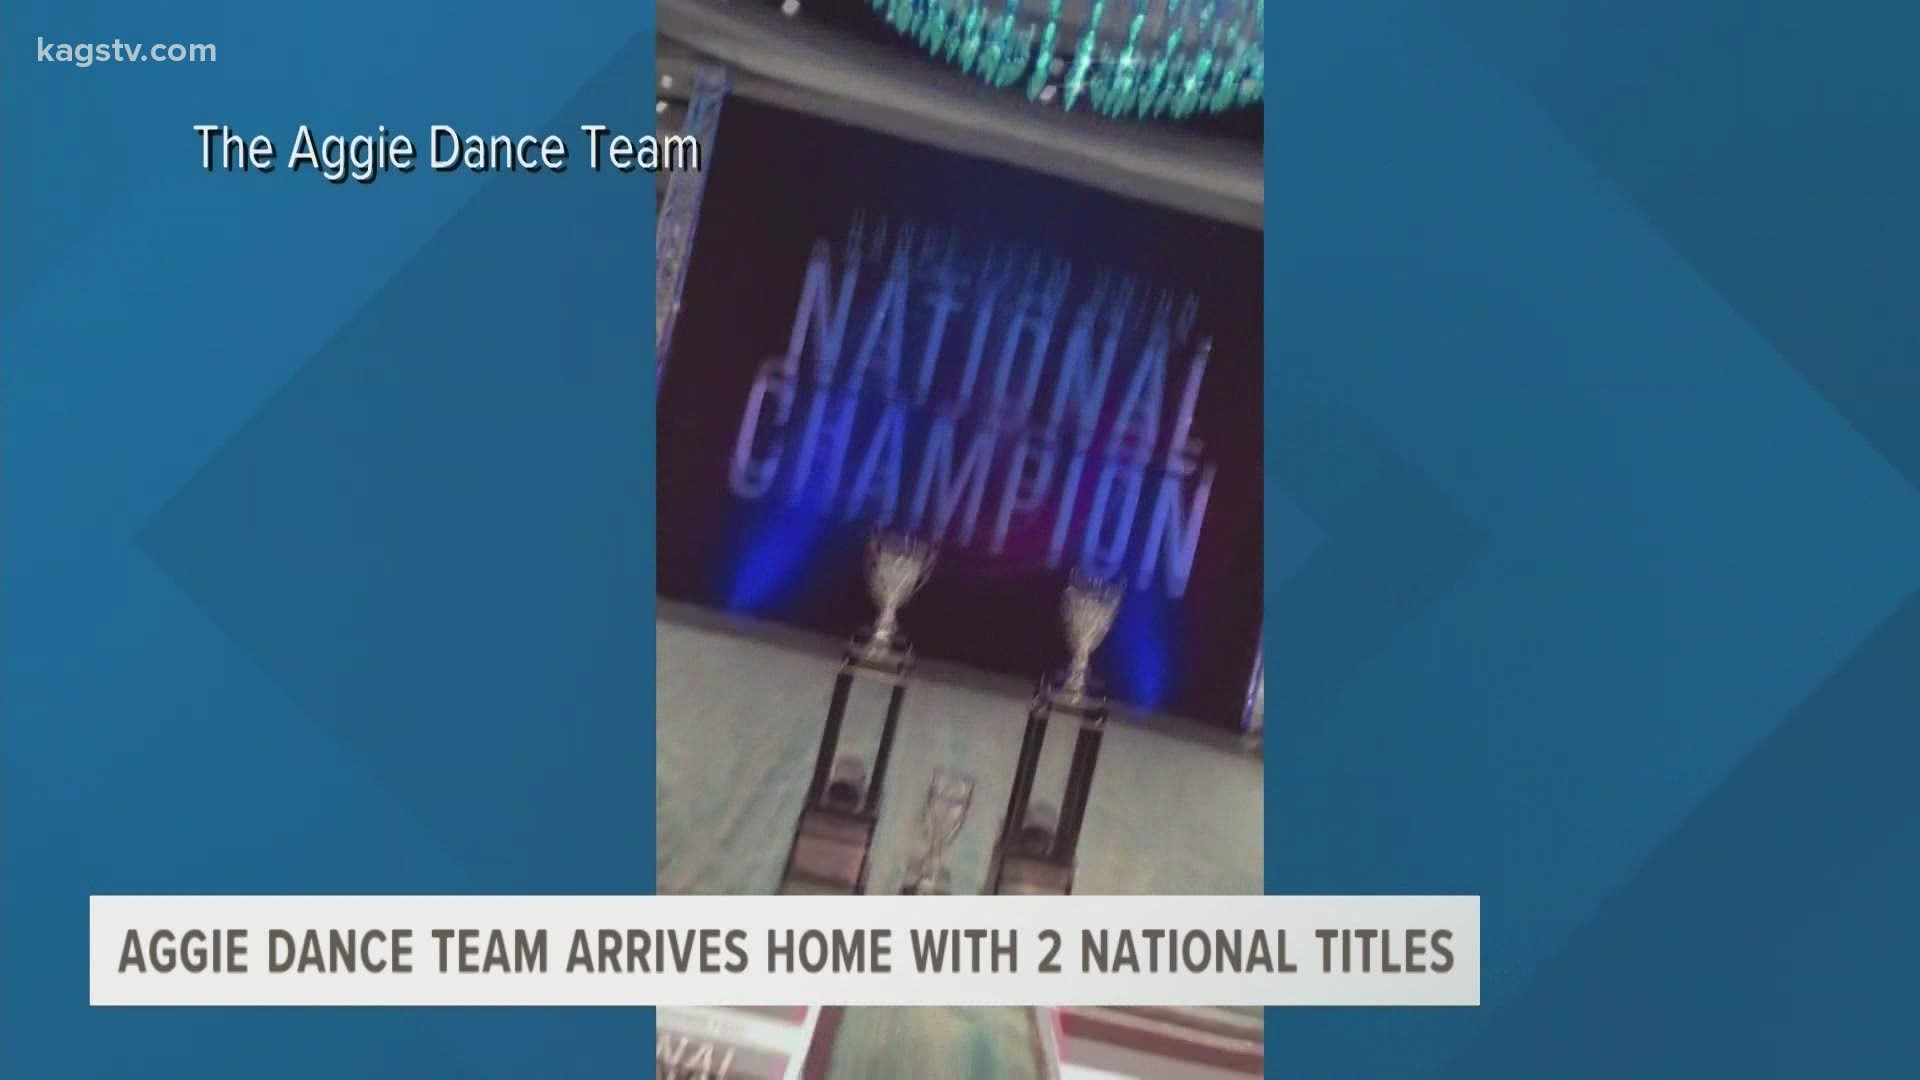 For the first time in 20 years, the Aggie Dance Team took their shot on a national stage and brought home not one, but two titles.